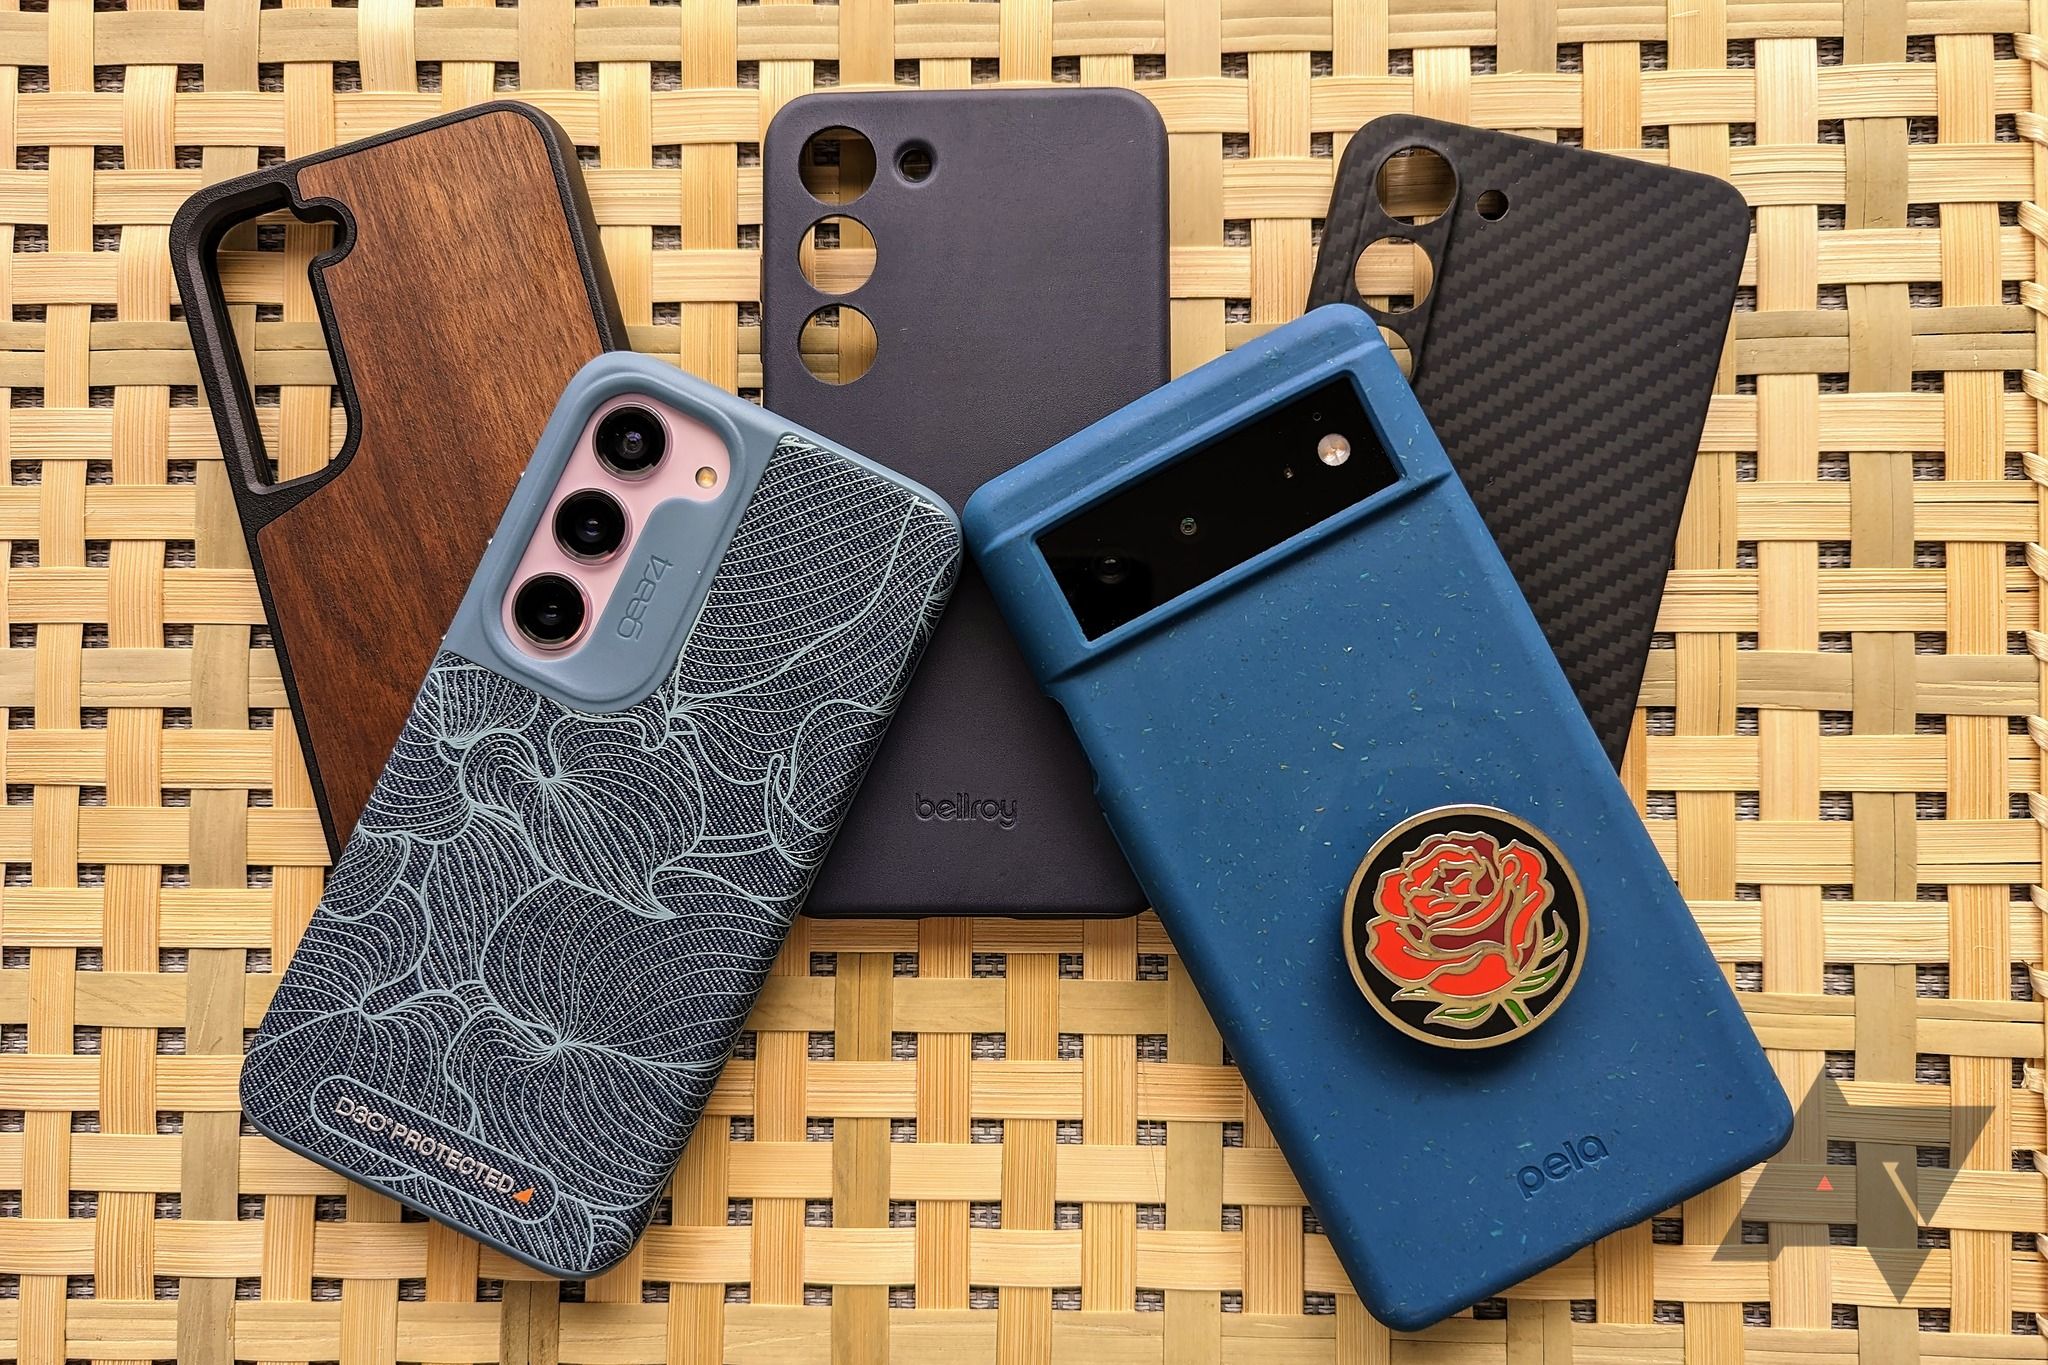 Cases made of Wood, fabric, leather, carbon fiber, and flax shive